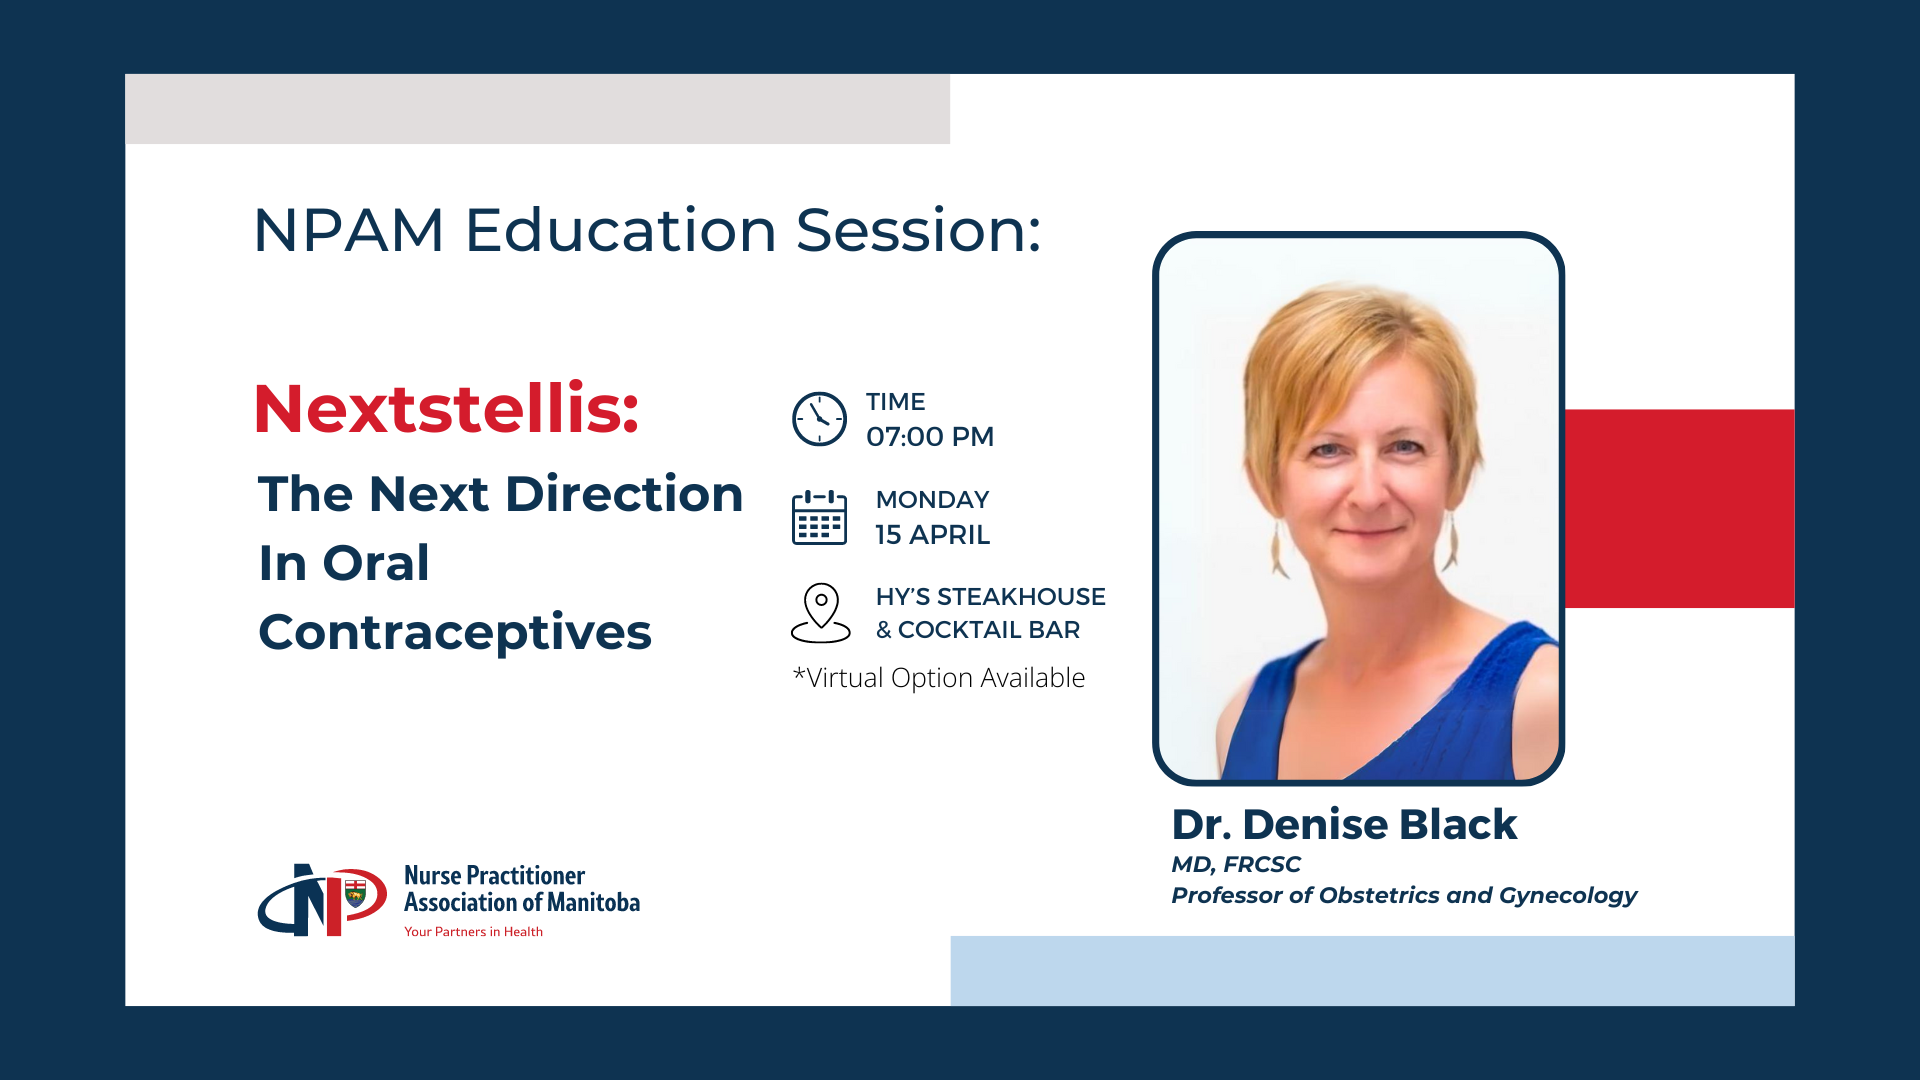 NPAM Education Event - Nextstellis: The Next Direction In Oral Contraceptives